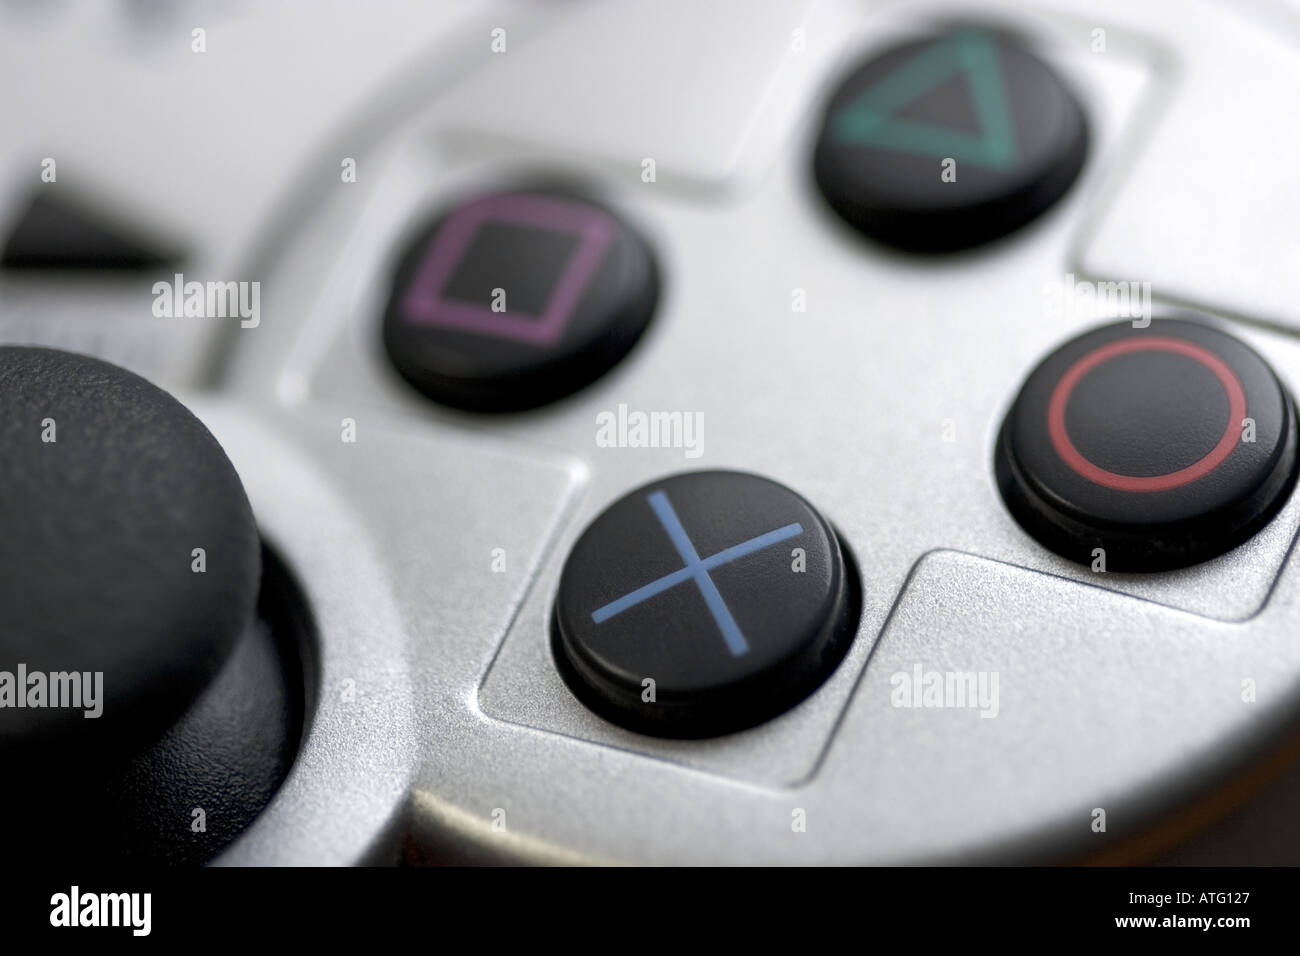 Close up of Sony console game pad buttons Stock Photo